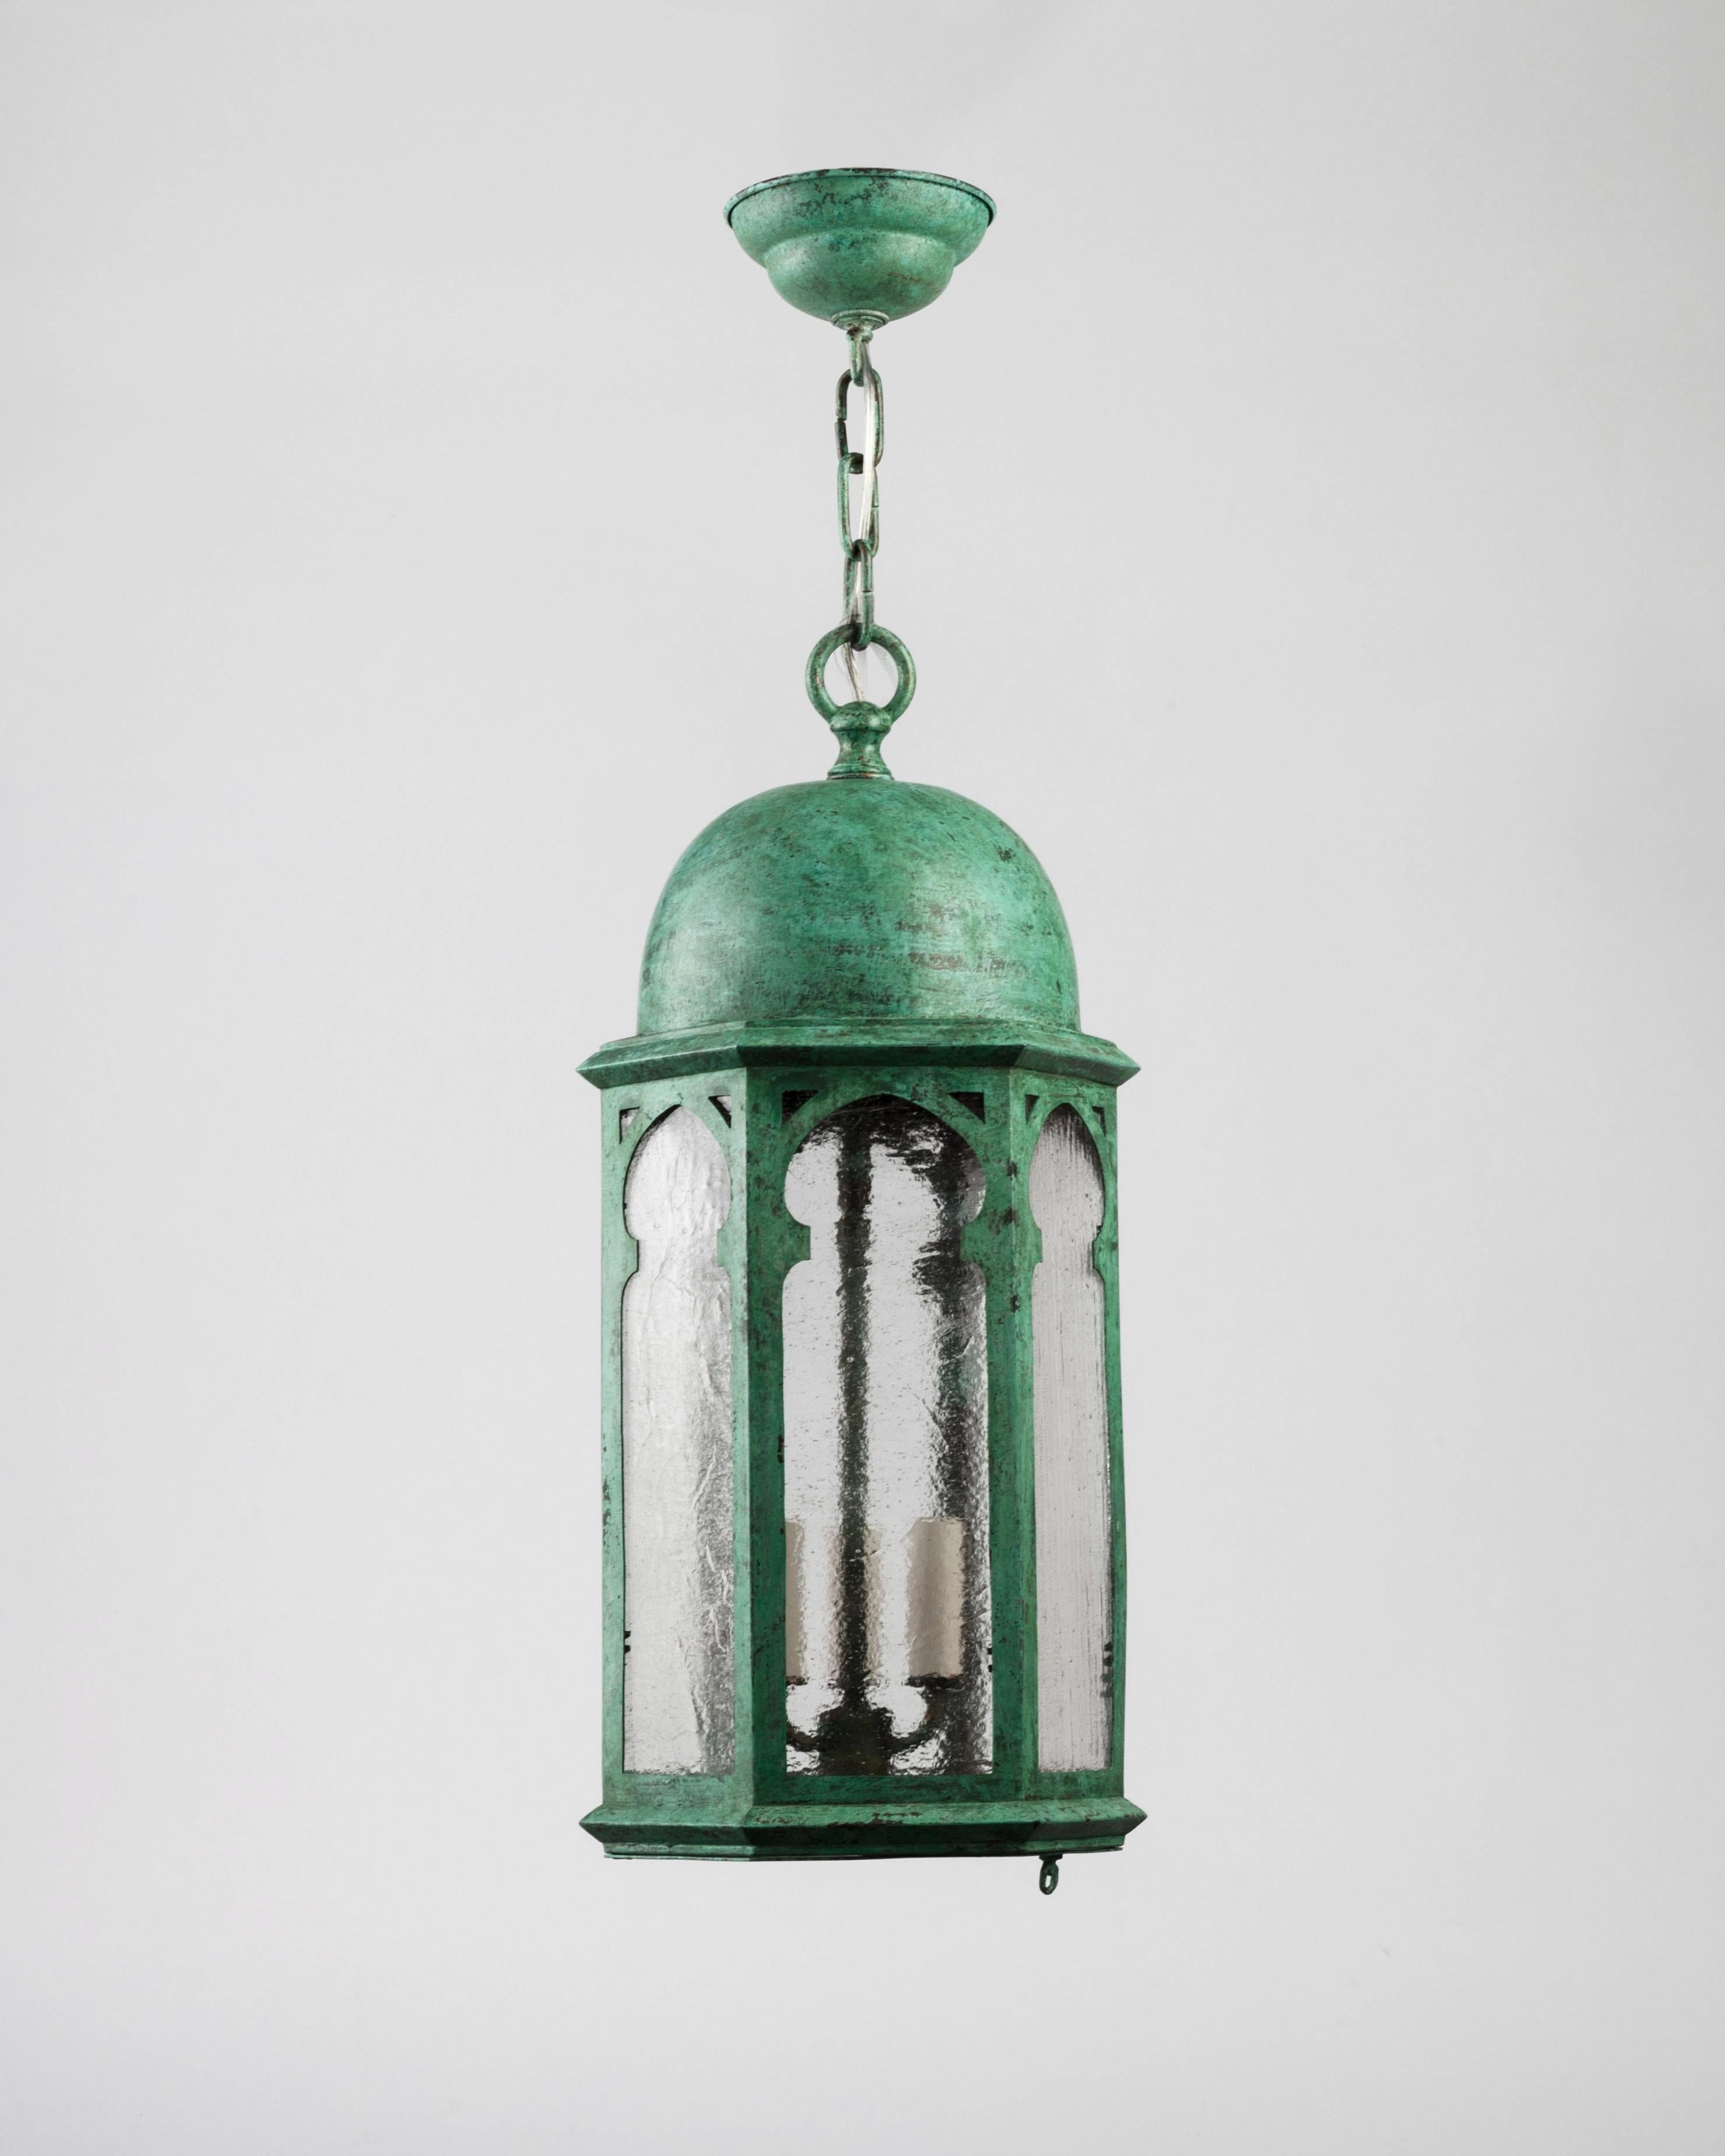 AHL3787

A vintage dome-topped hexagonal verdigris copper lantern glazed with seeded clear glass. With a hinged bottom door for re-lamping. Circa 1930s.

Dimensions:
Current height: 63-3/8